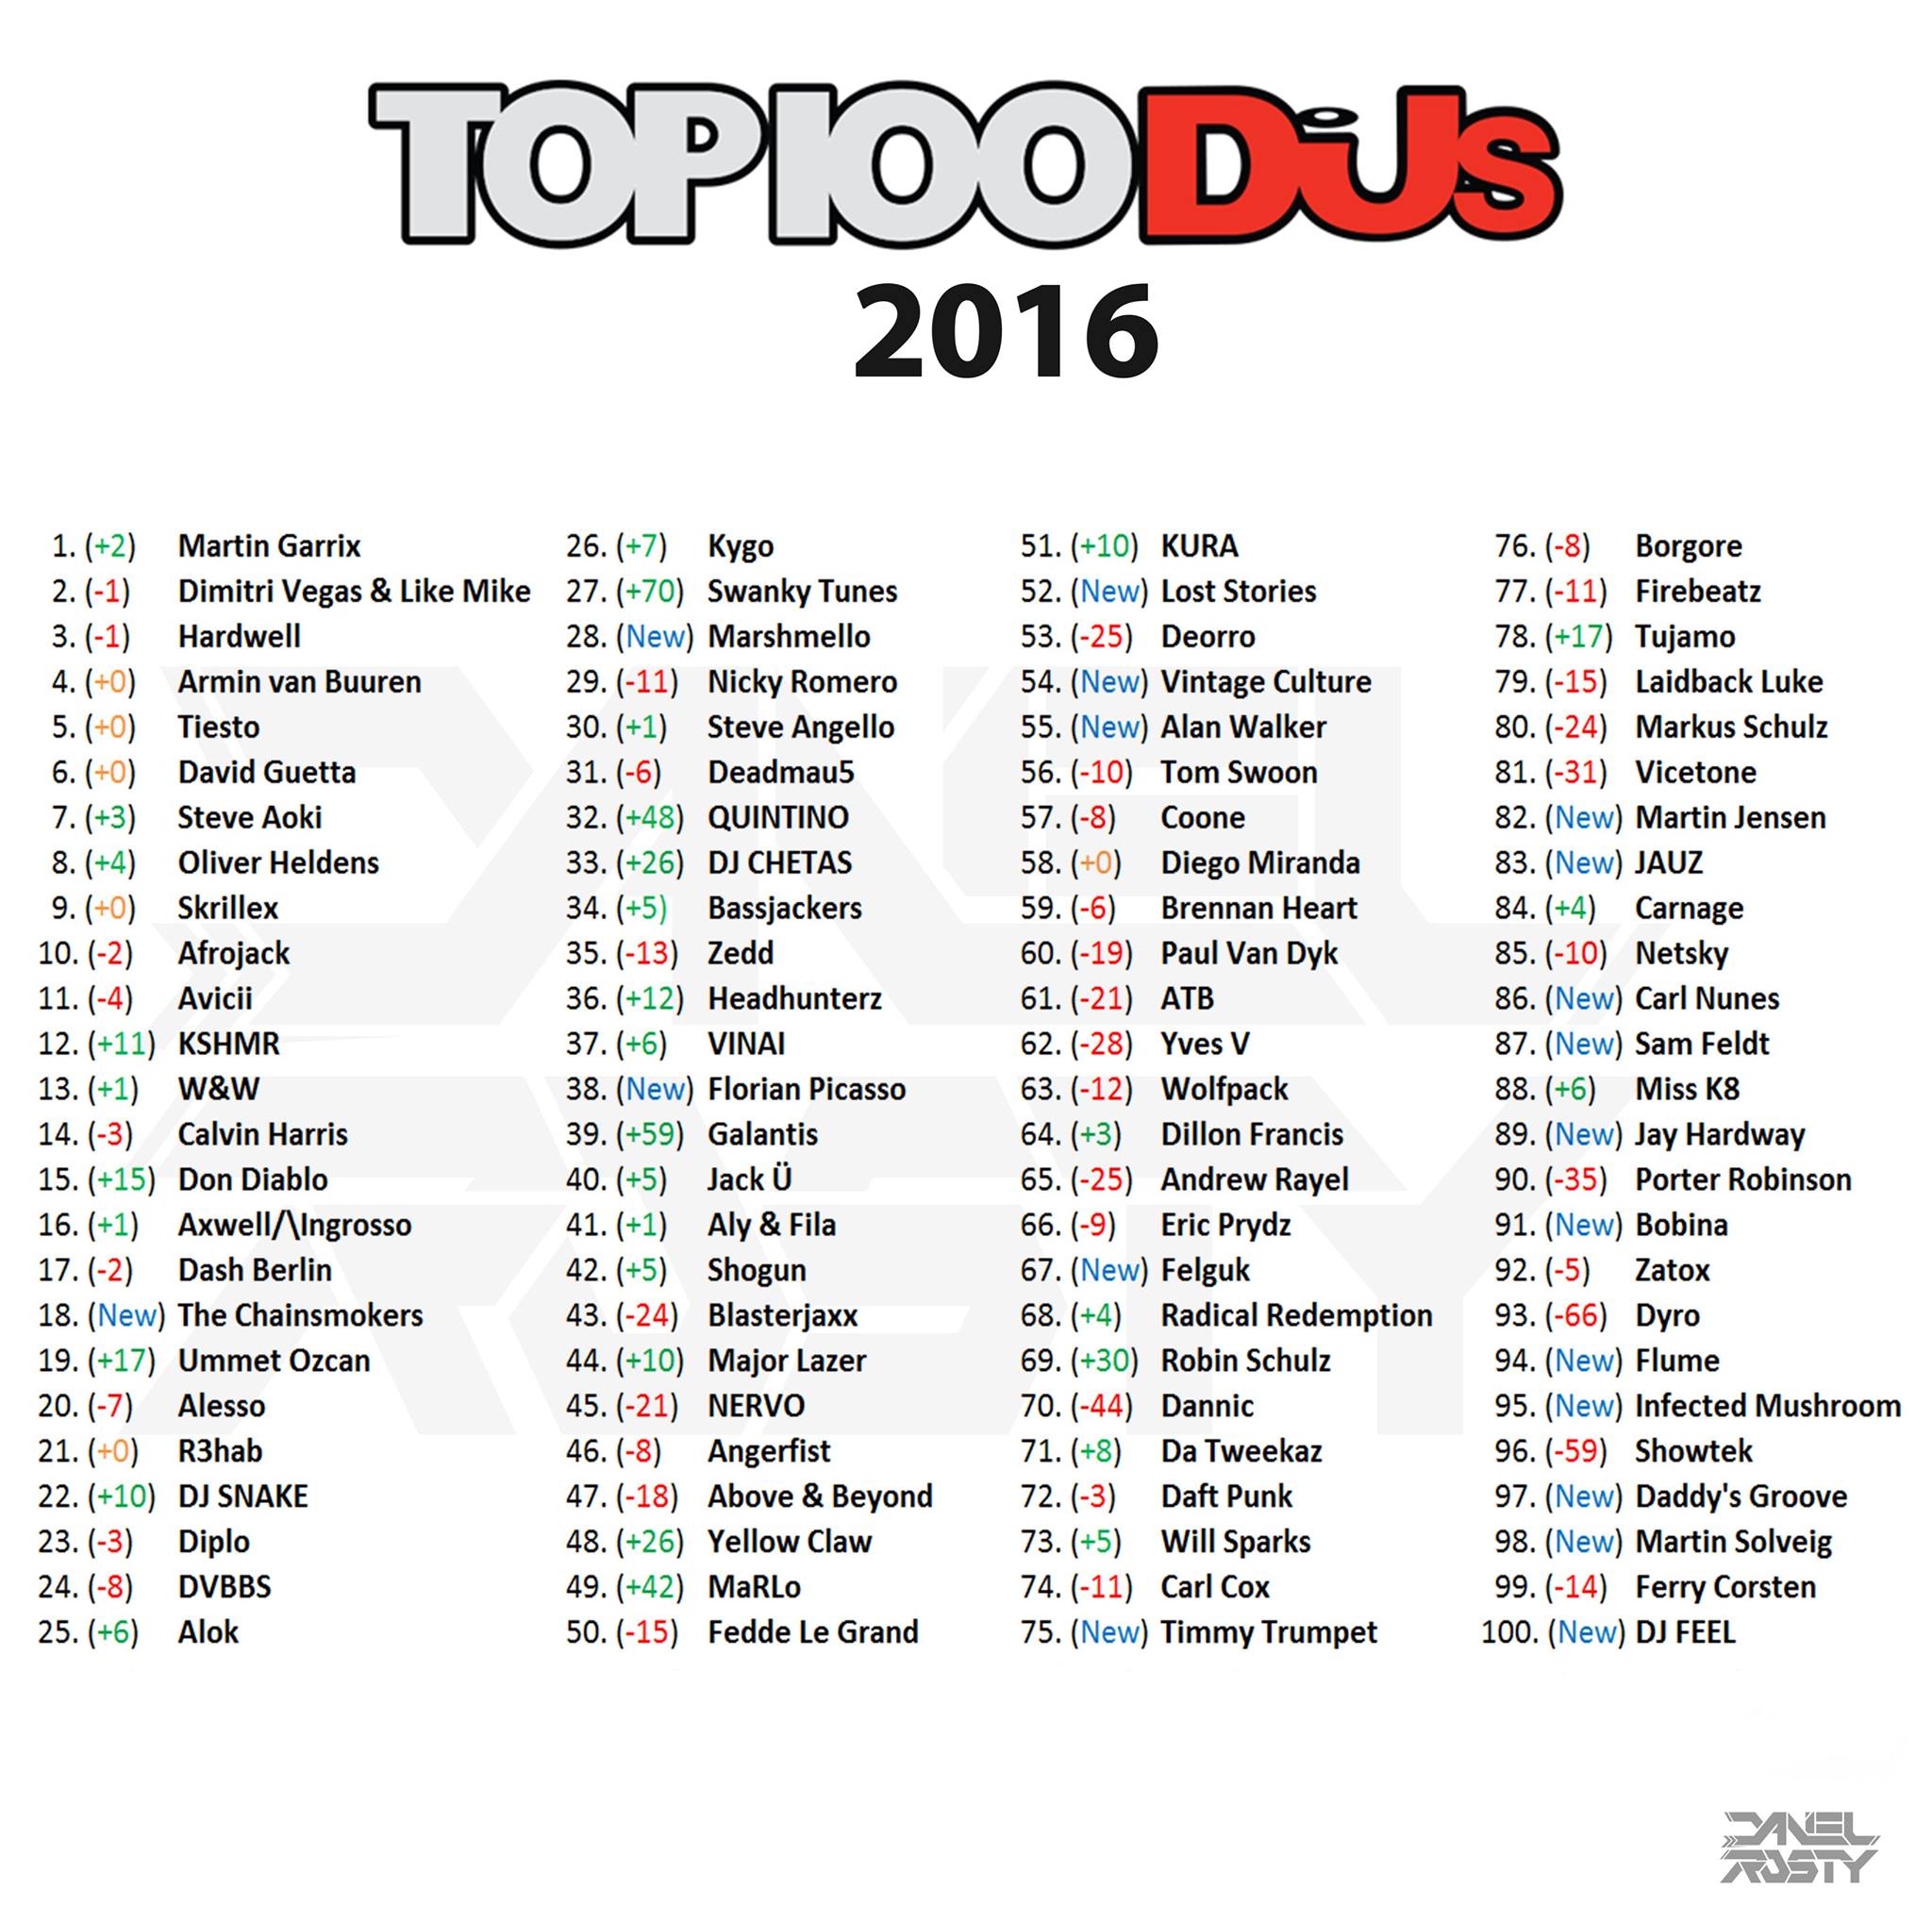 Not a fan !!! DJ's Reactions To The DJ MAG's Top 100 Dj List | Rave Jungle